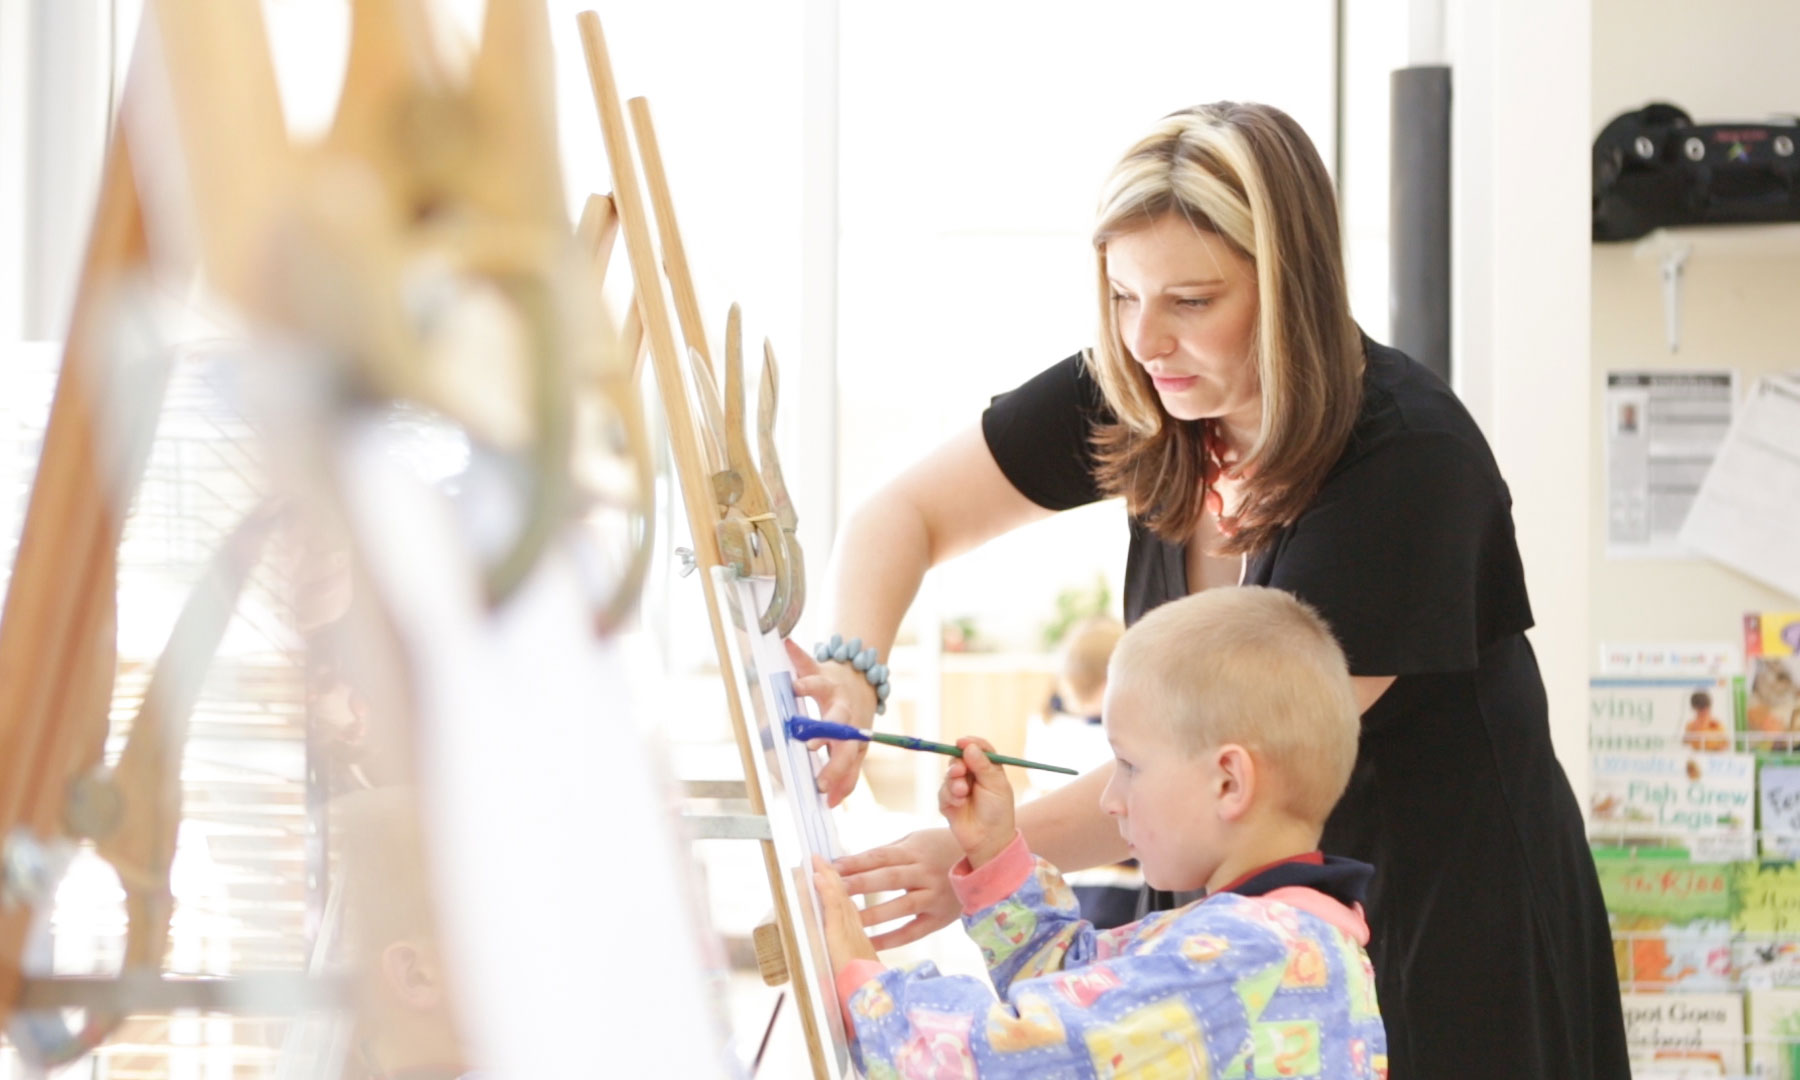 A classroom teacher assists a child painting at an easel.